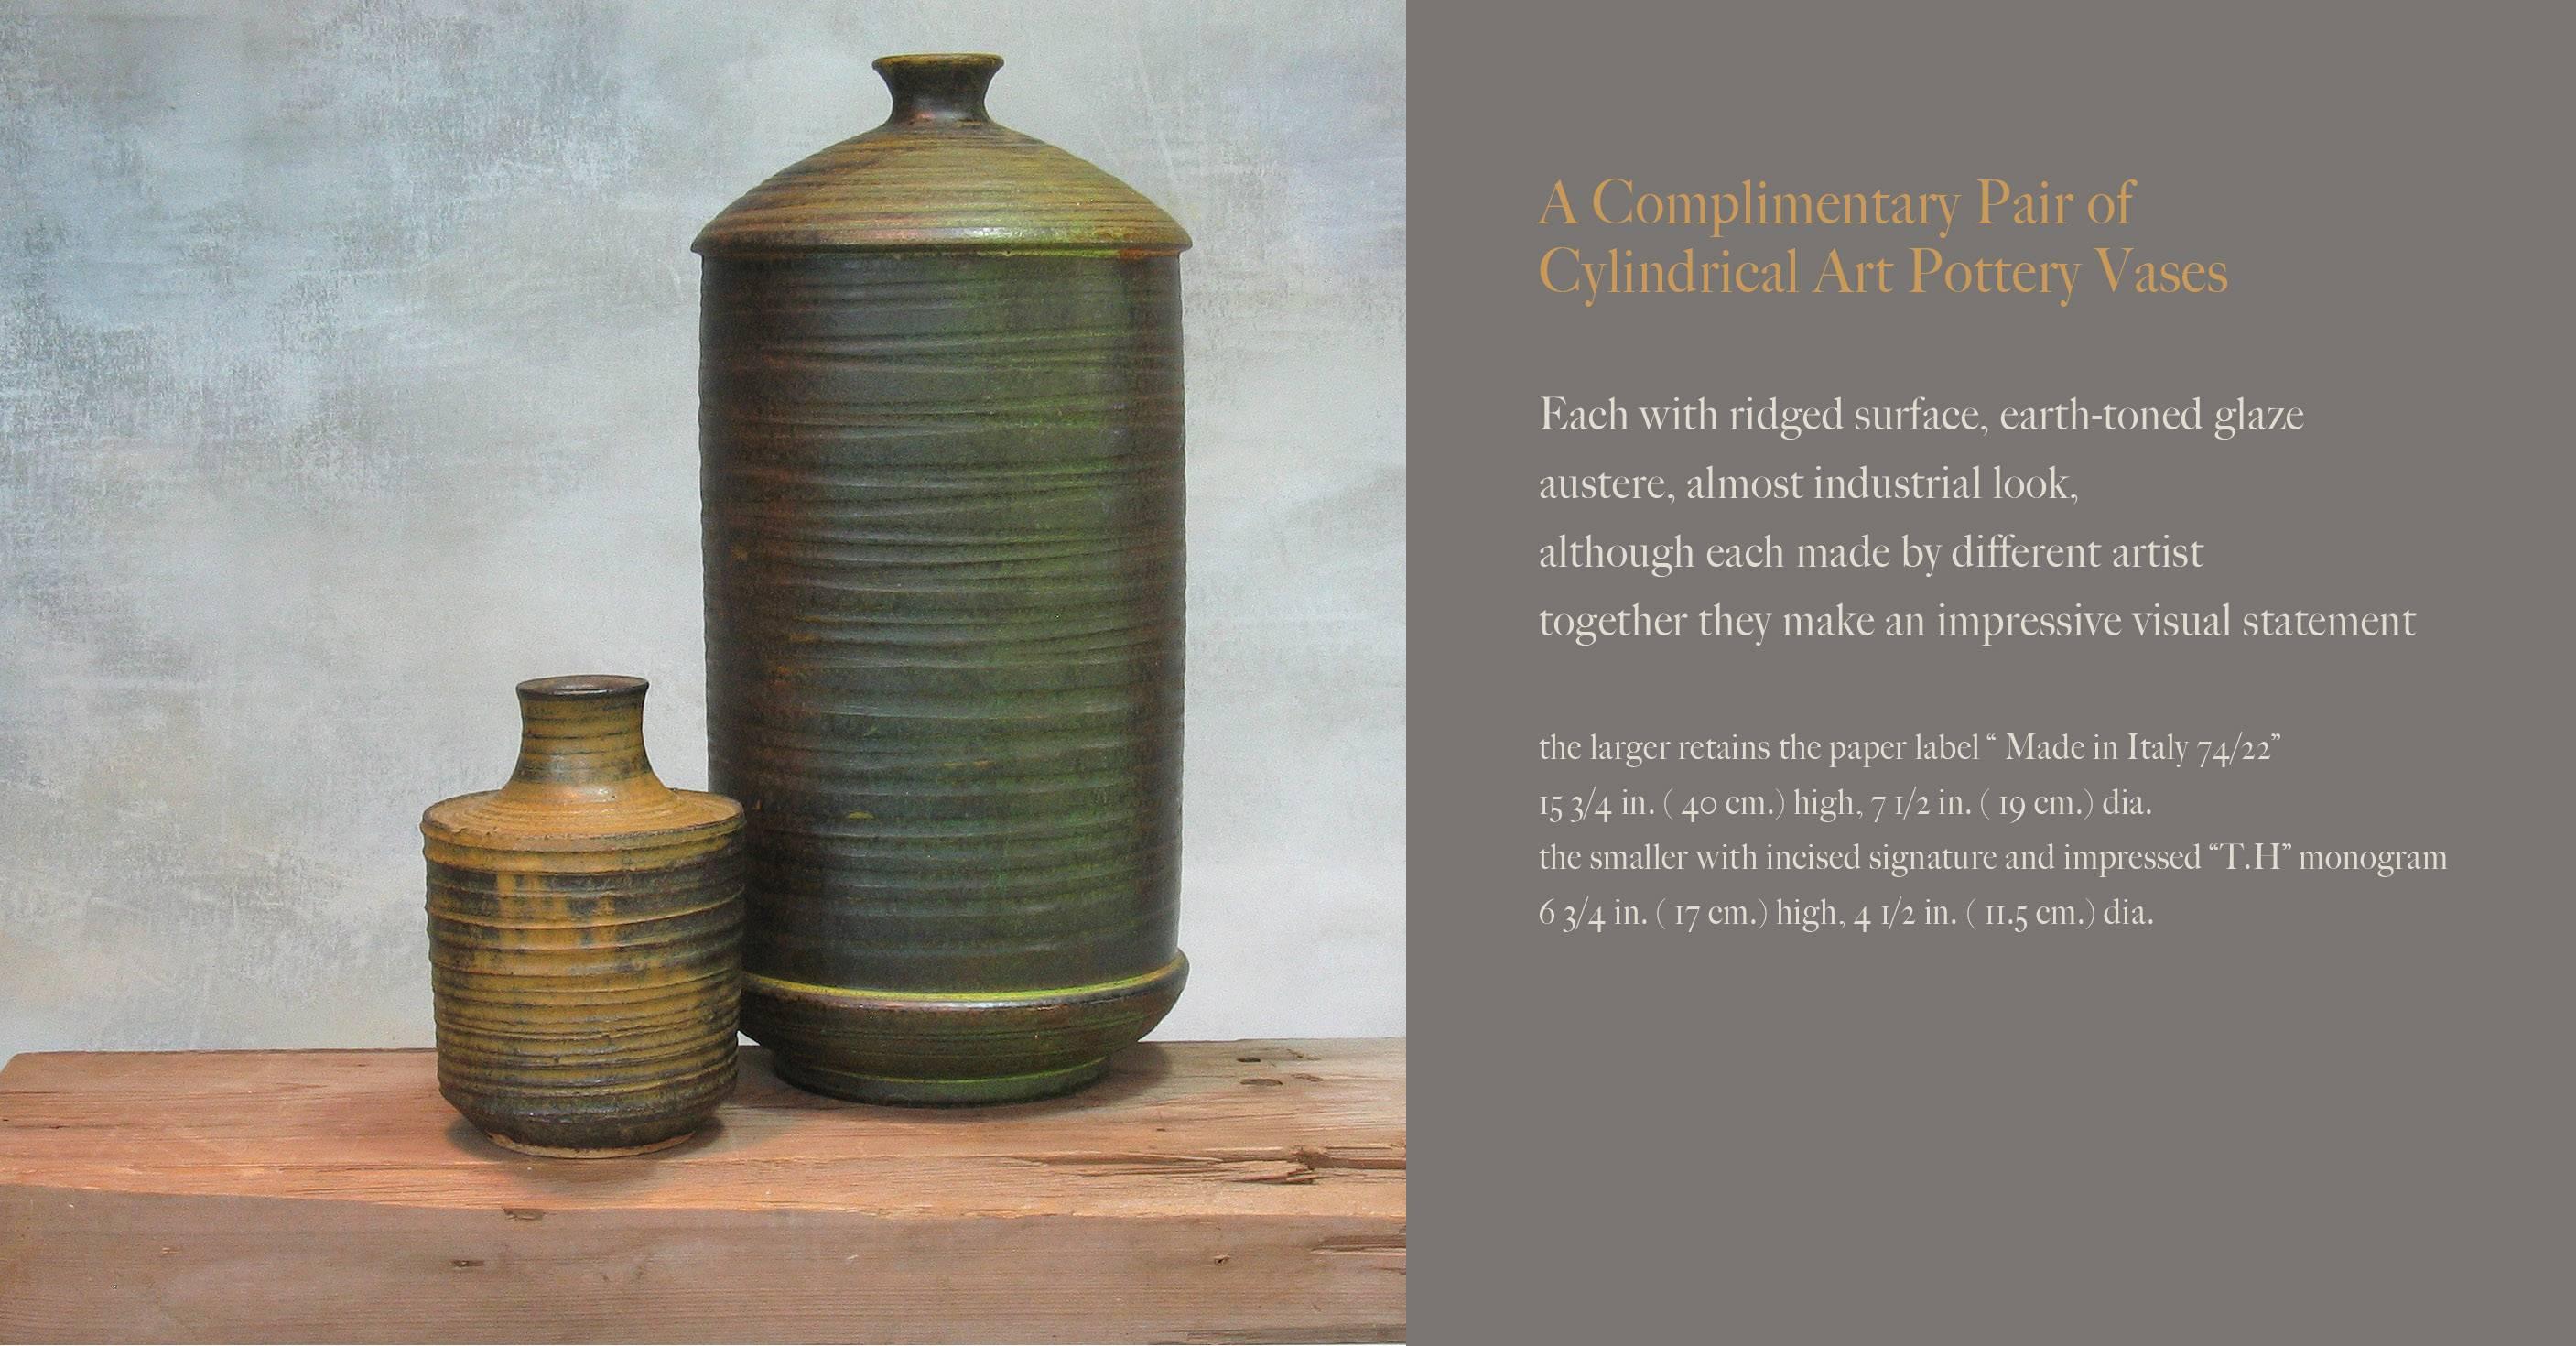 A complimentary pair of cylindrical art pottery vases, Each with ridged surface, earth-toned glaze austere, almost industrial look, although each made by different artists, together they make an impressive visual statement. The larger retains the